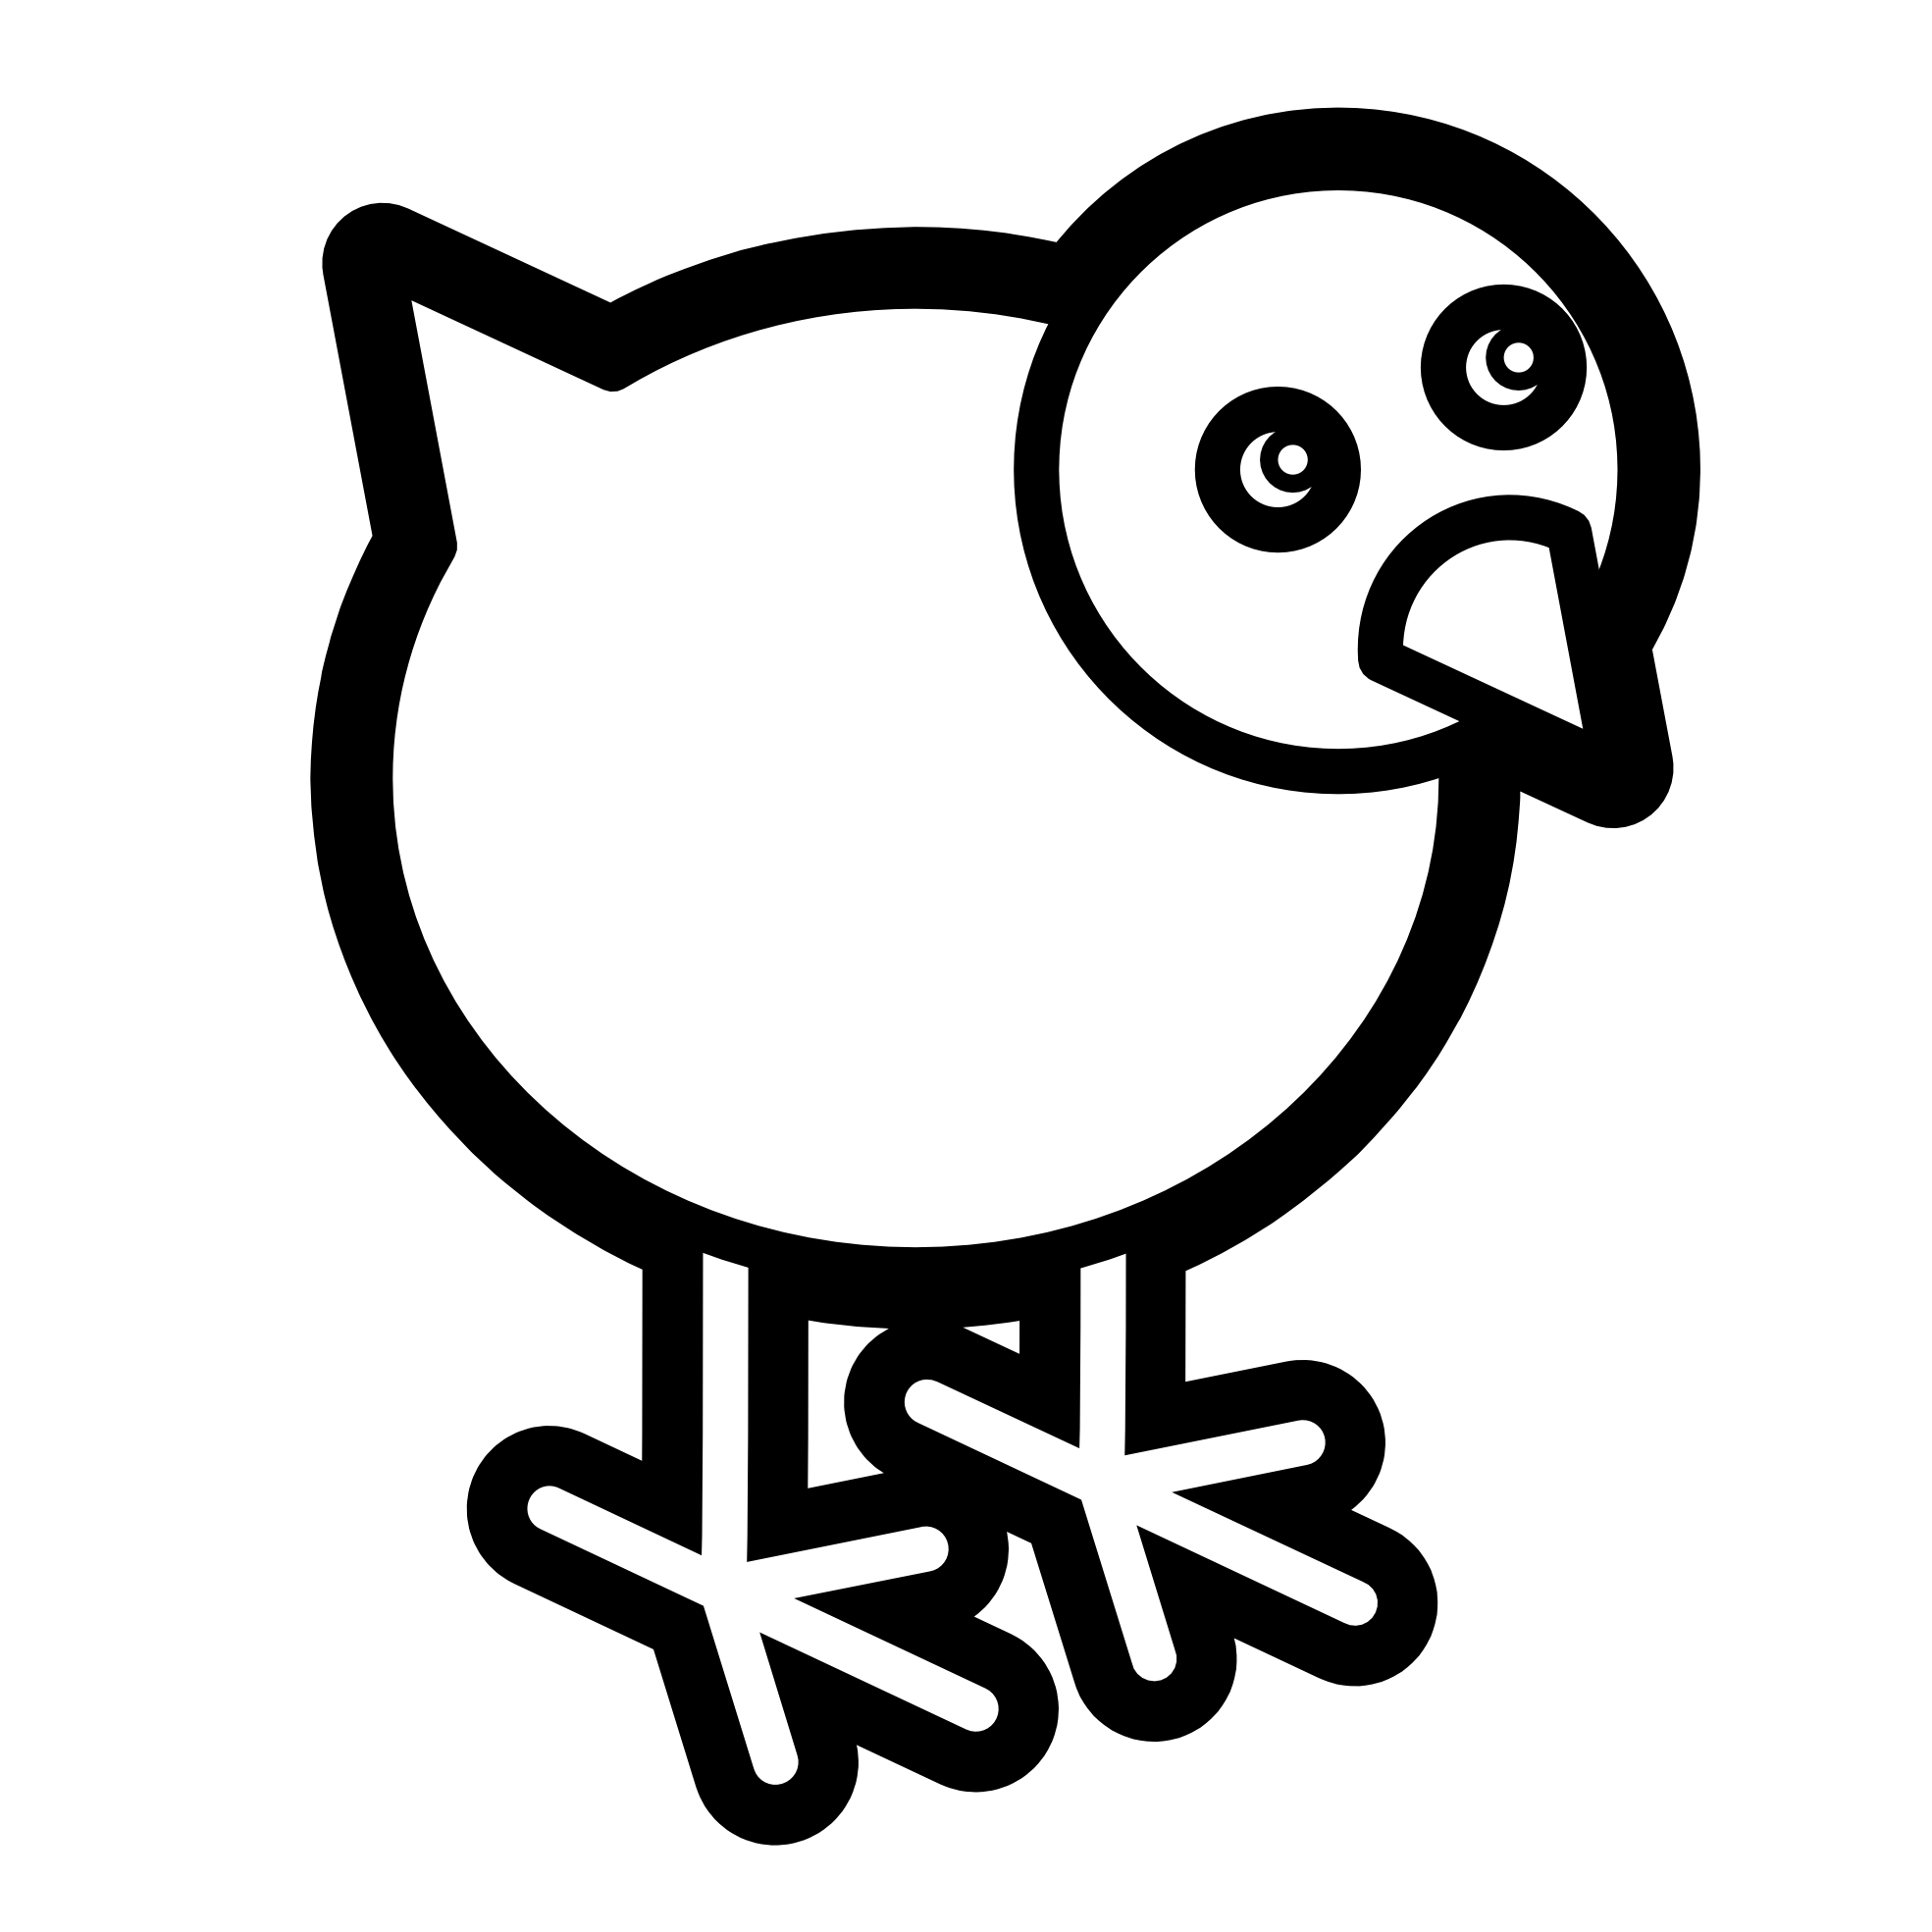 Chicken Black And White Clipart